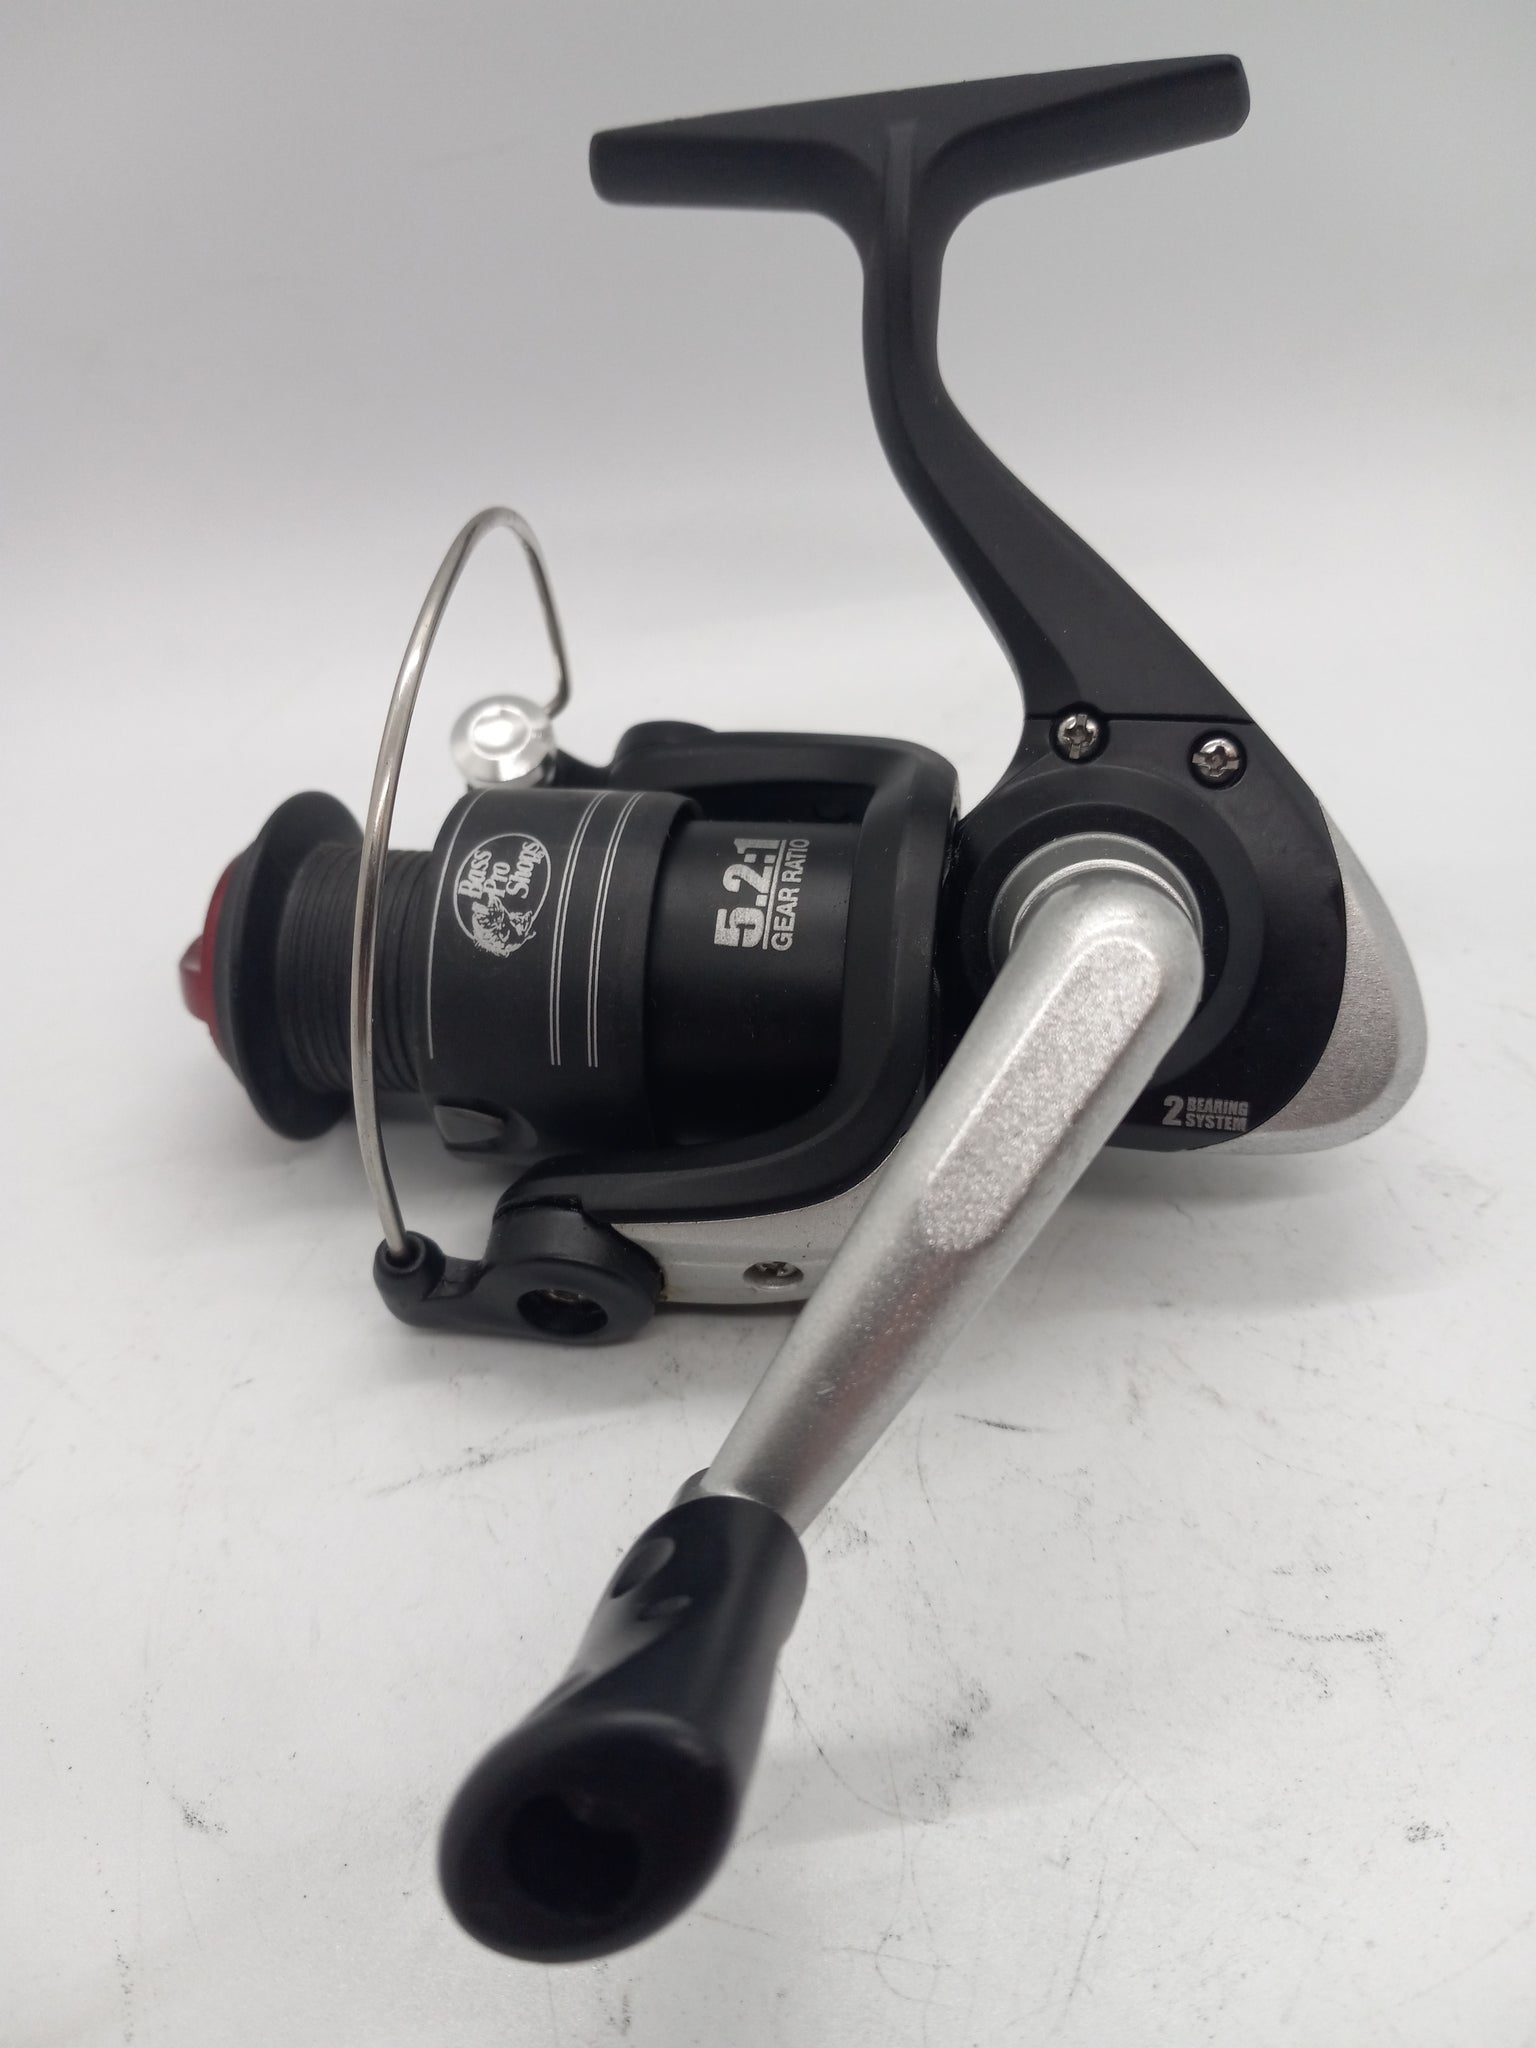 Bass Pro Shops Quick Draw Rear Drag Spinning Reel - 40 Size